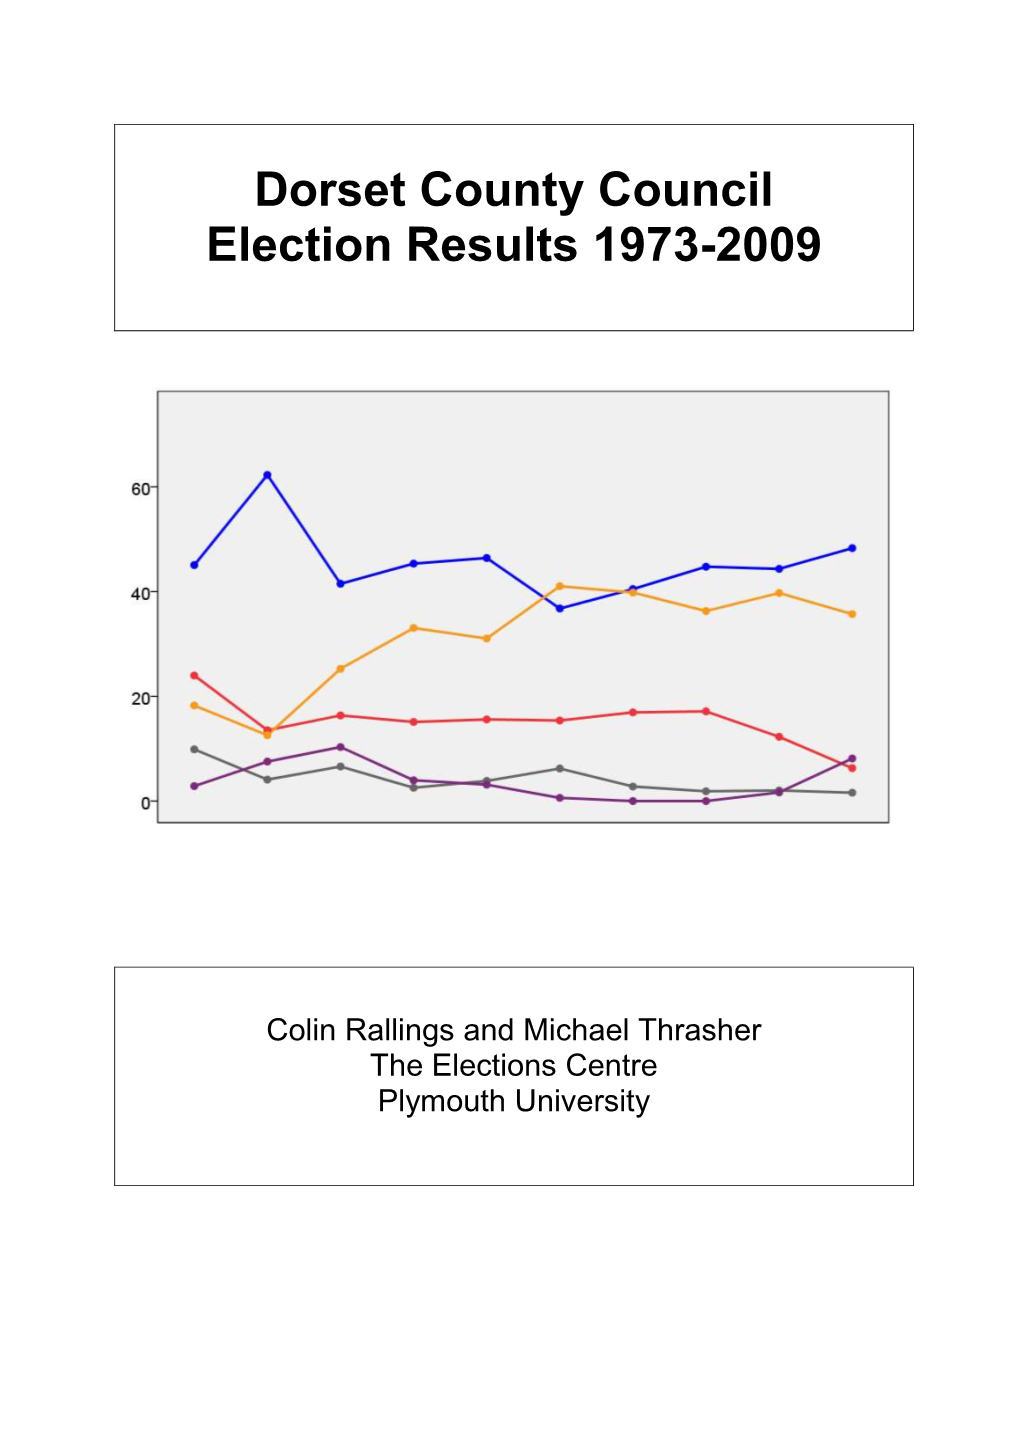 Dorset County Council Election Results 1973-2009